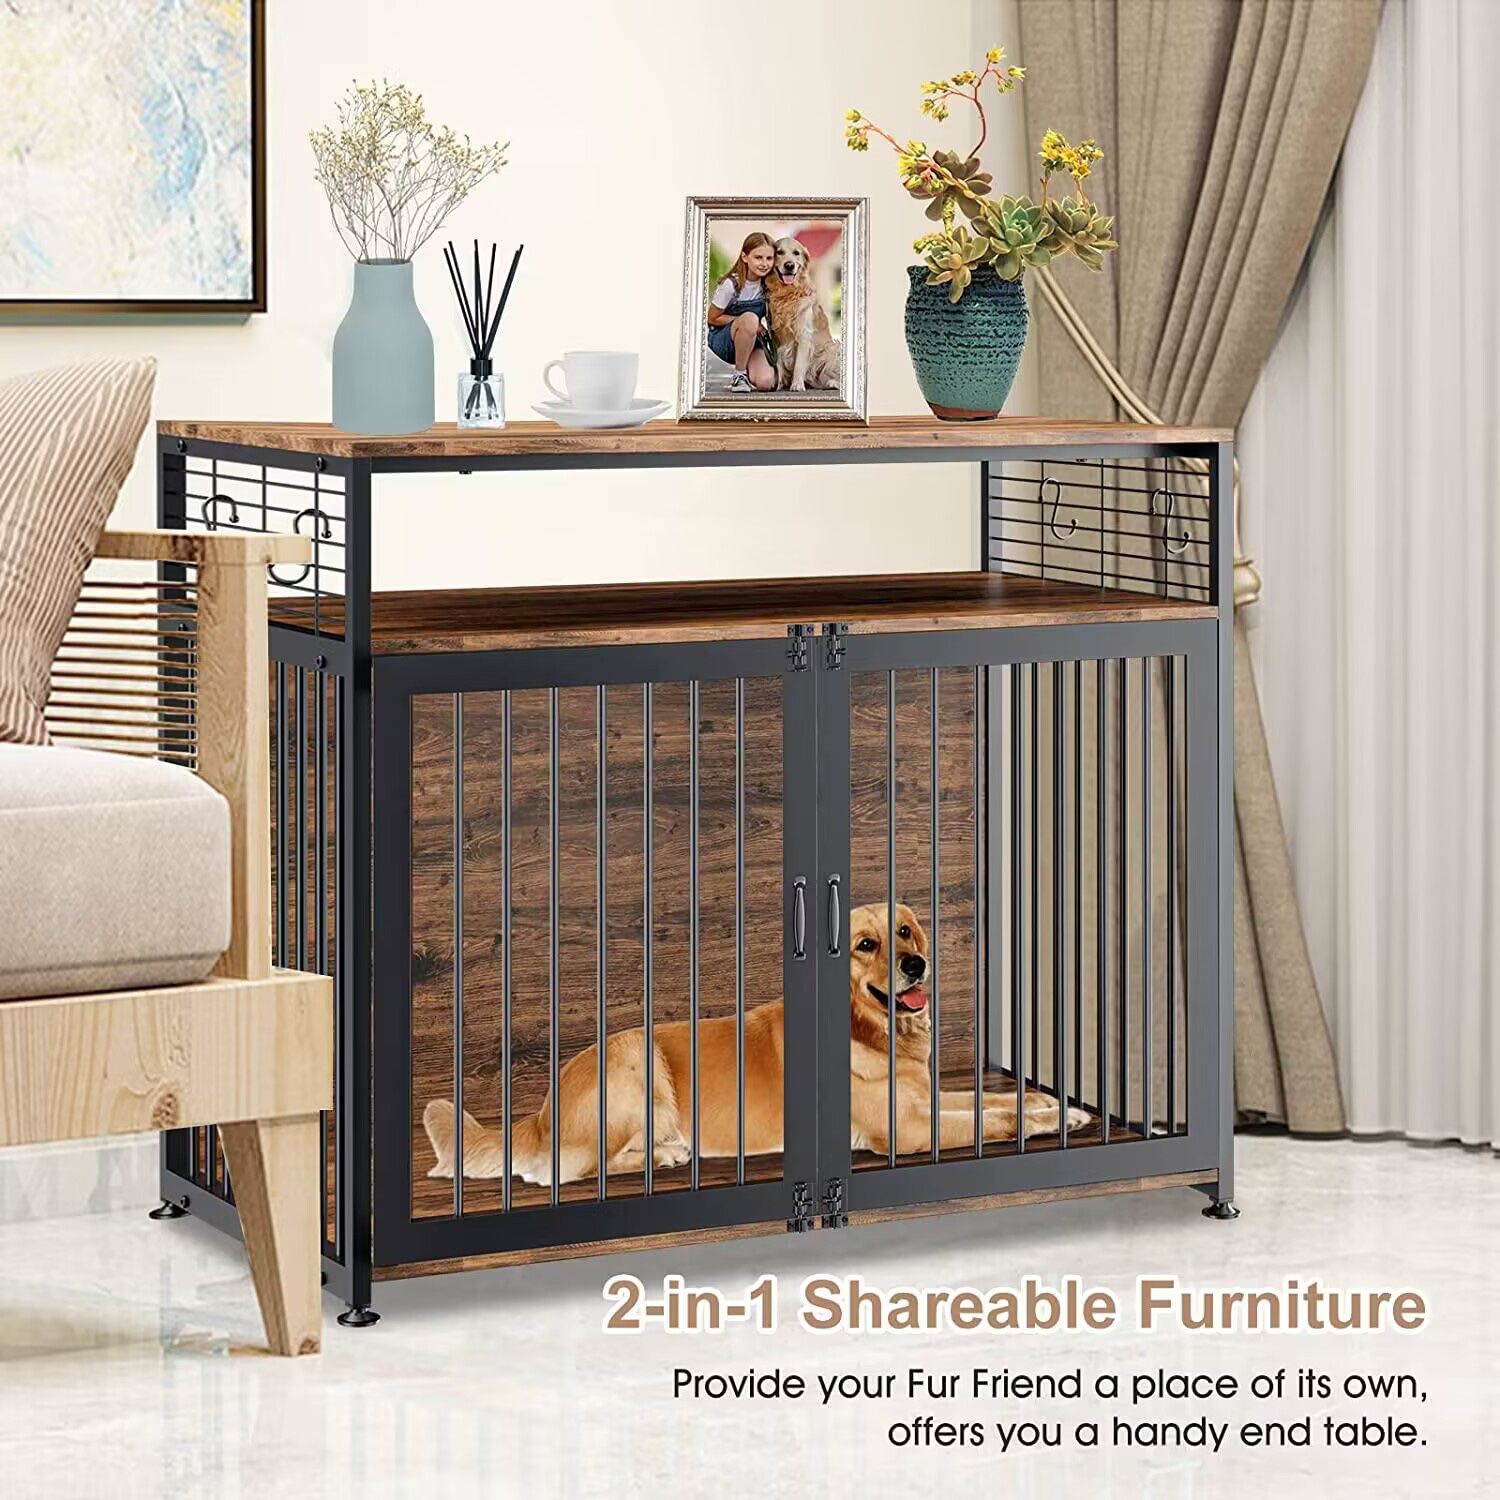 Dog Crate Furniture 41" w/ 2 Drawers Large Dog Kennel End Table Wooden Dog Cage